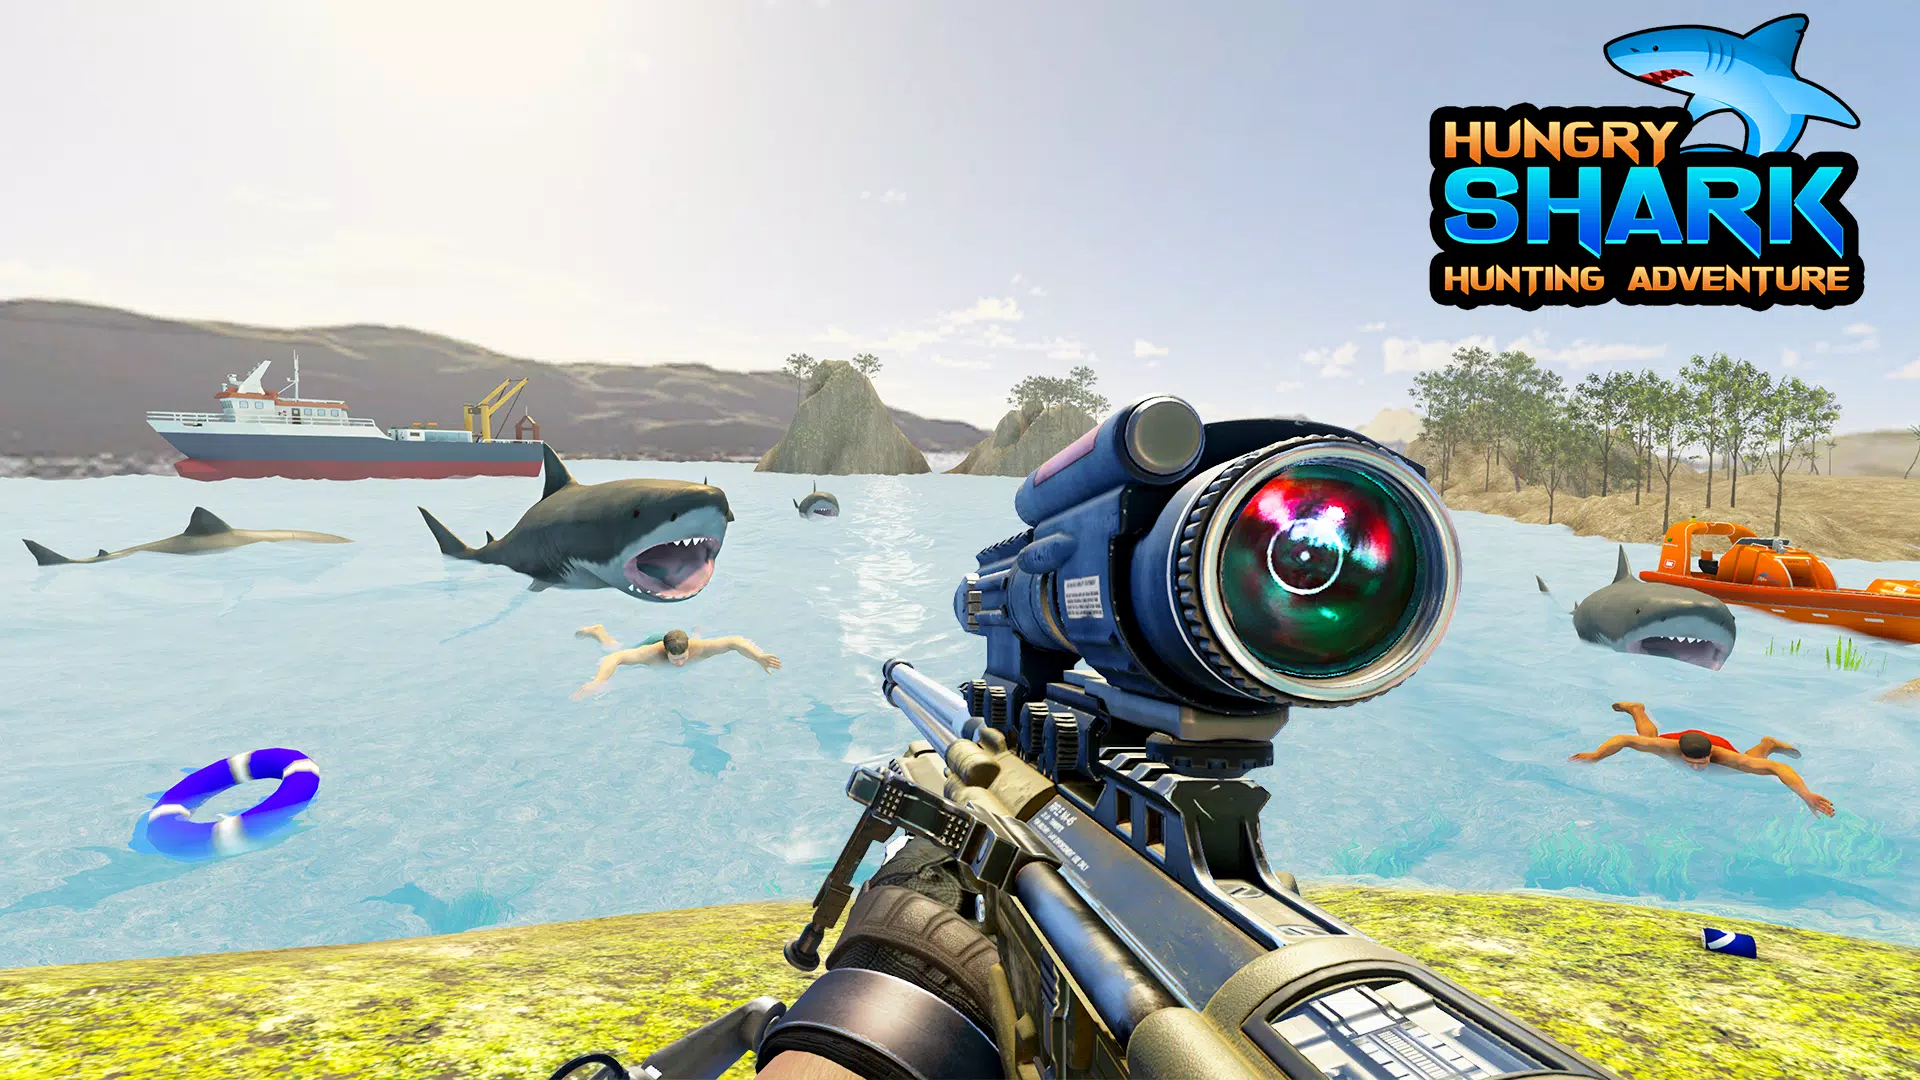 Real Whale Shark Hunting Games 1.0.6 Free Download